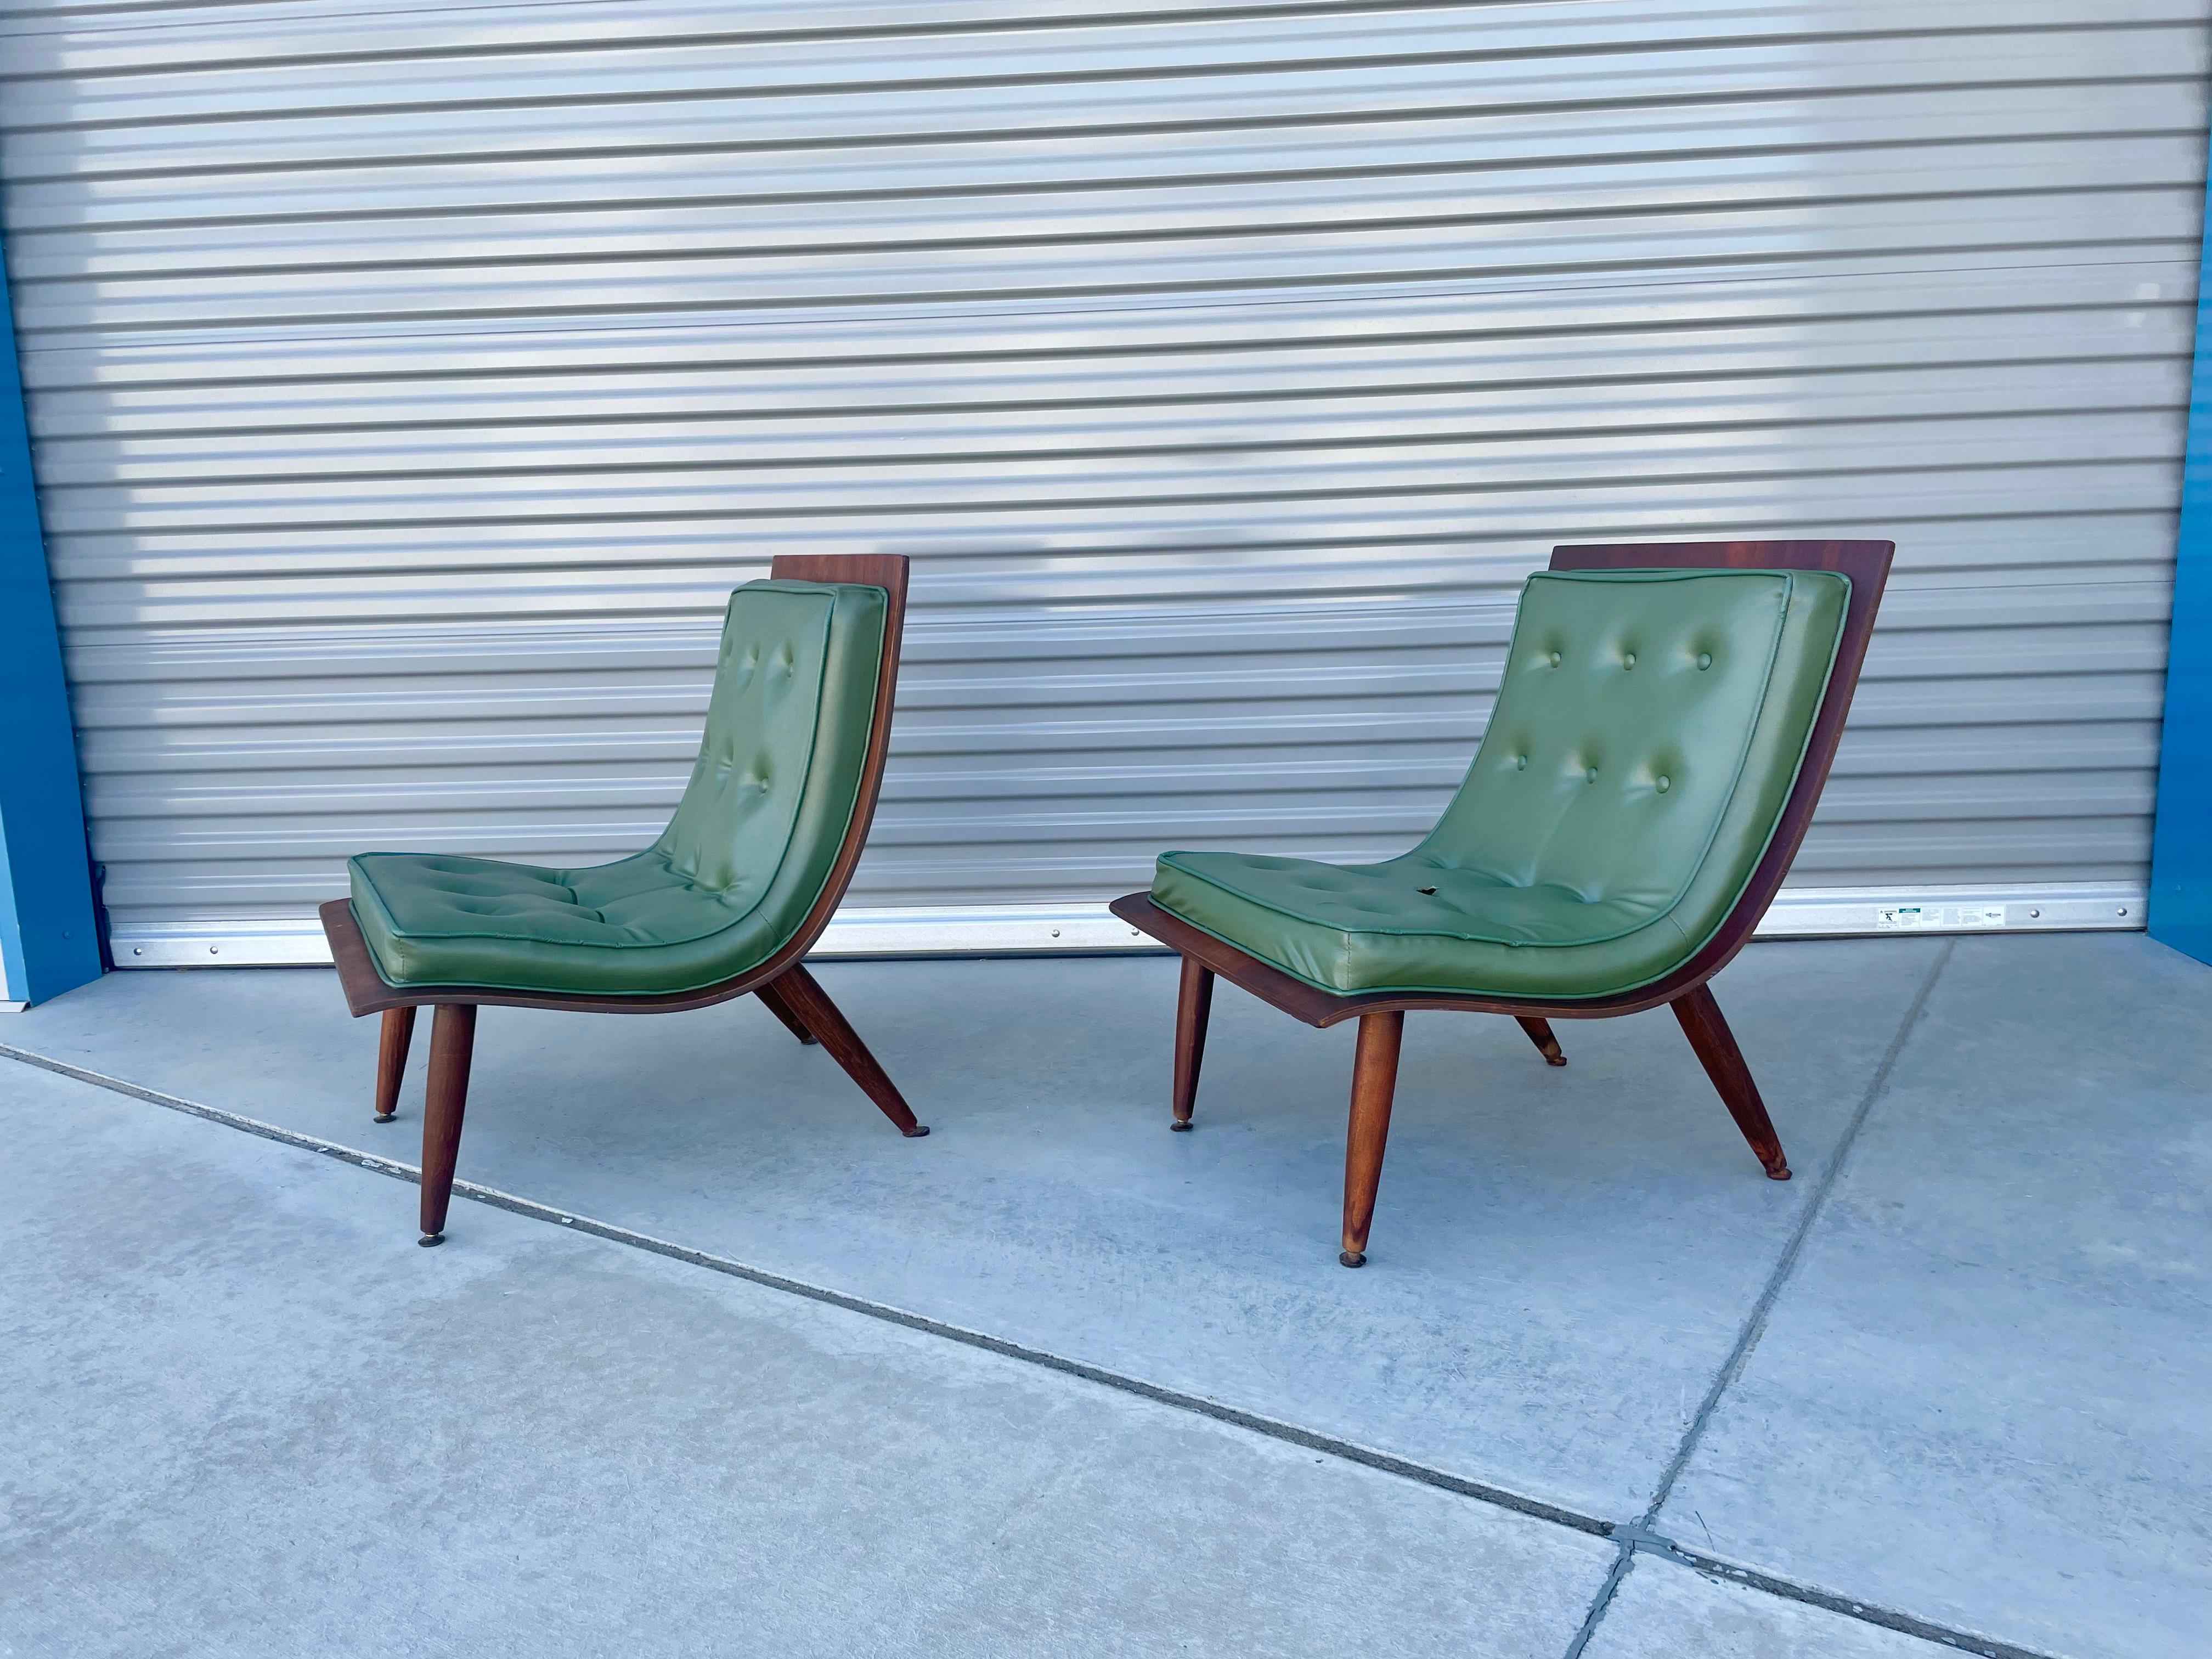 Vintage scoop lounge chairs manufactured by Carter Brothers, circa the 1950s. This mid-century pair of scoop chairs feature a sleek design covered in tufted green leather upholstery with a walnut back. The chairs also have a unique wave shape design